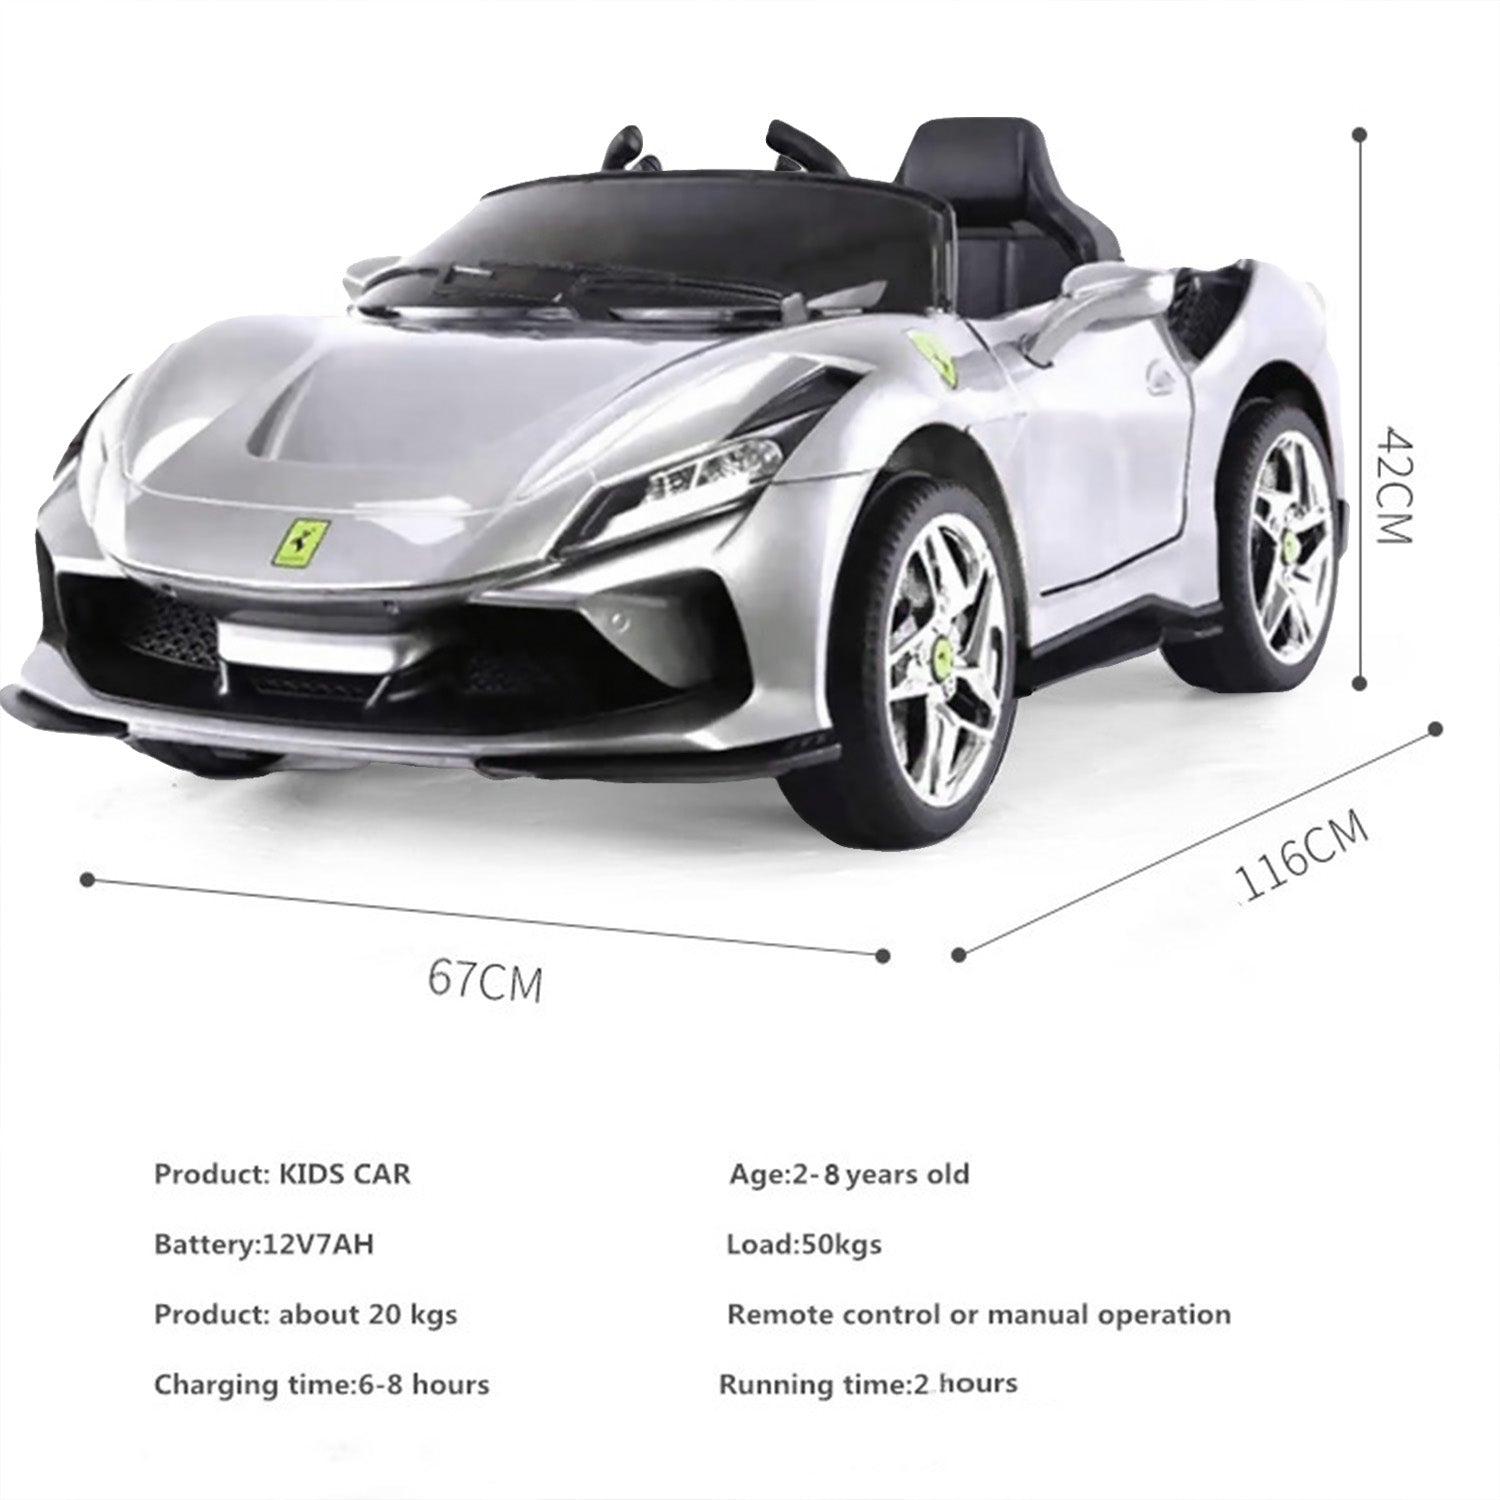 Baby Moo Ferrari F8 12V Battery Operated Ride On Car for Kids | Remote Control | Rechargeable Battery | USB MP3 Player | Ages 2-8 - Silver - Baby Moo